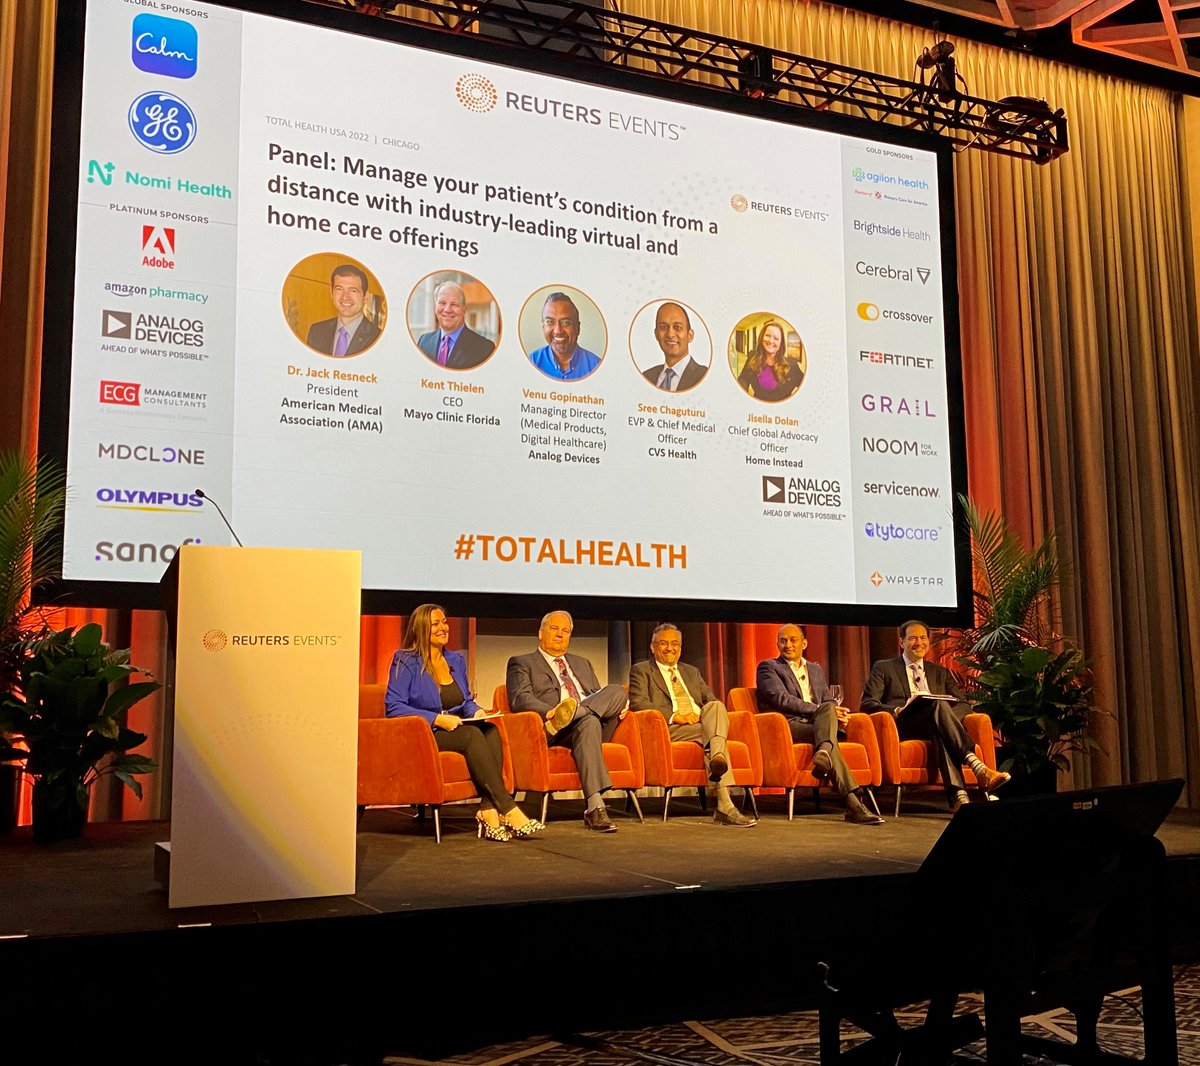 Wonderful discussion today on remote care solutions at @Reuters #TotalHealthUSA. Thank you to my fellow panelists @JackResneckMD, @KentThielen and Venu Gopinathan, and to our moderator @JisellaDolan for the great conversation.